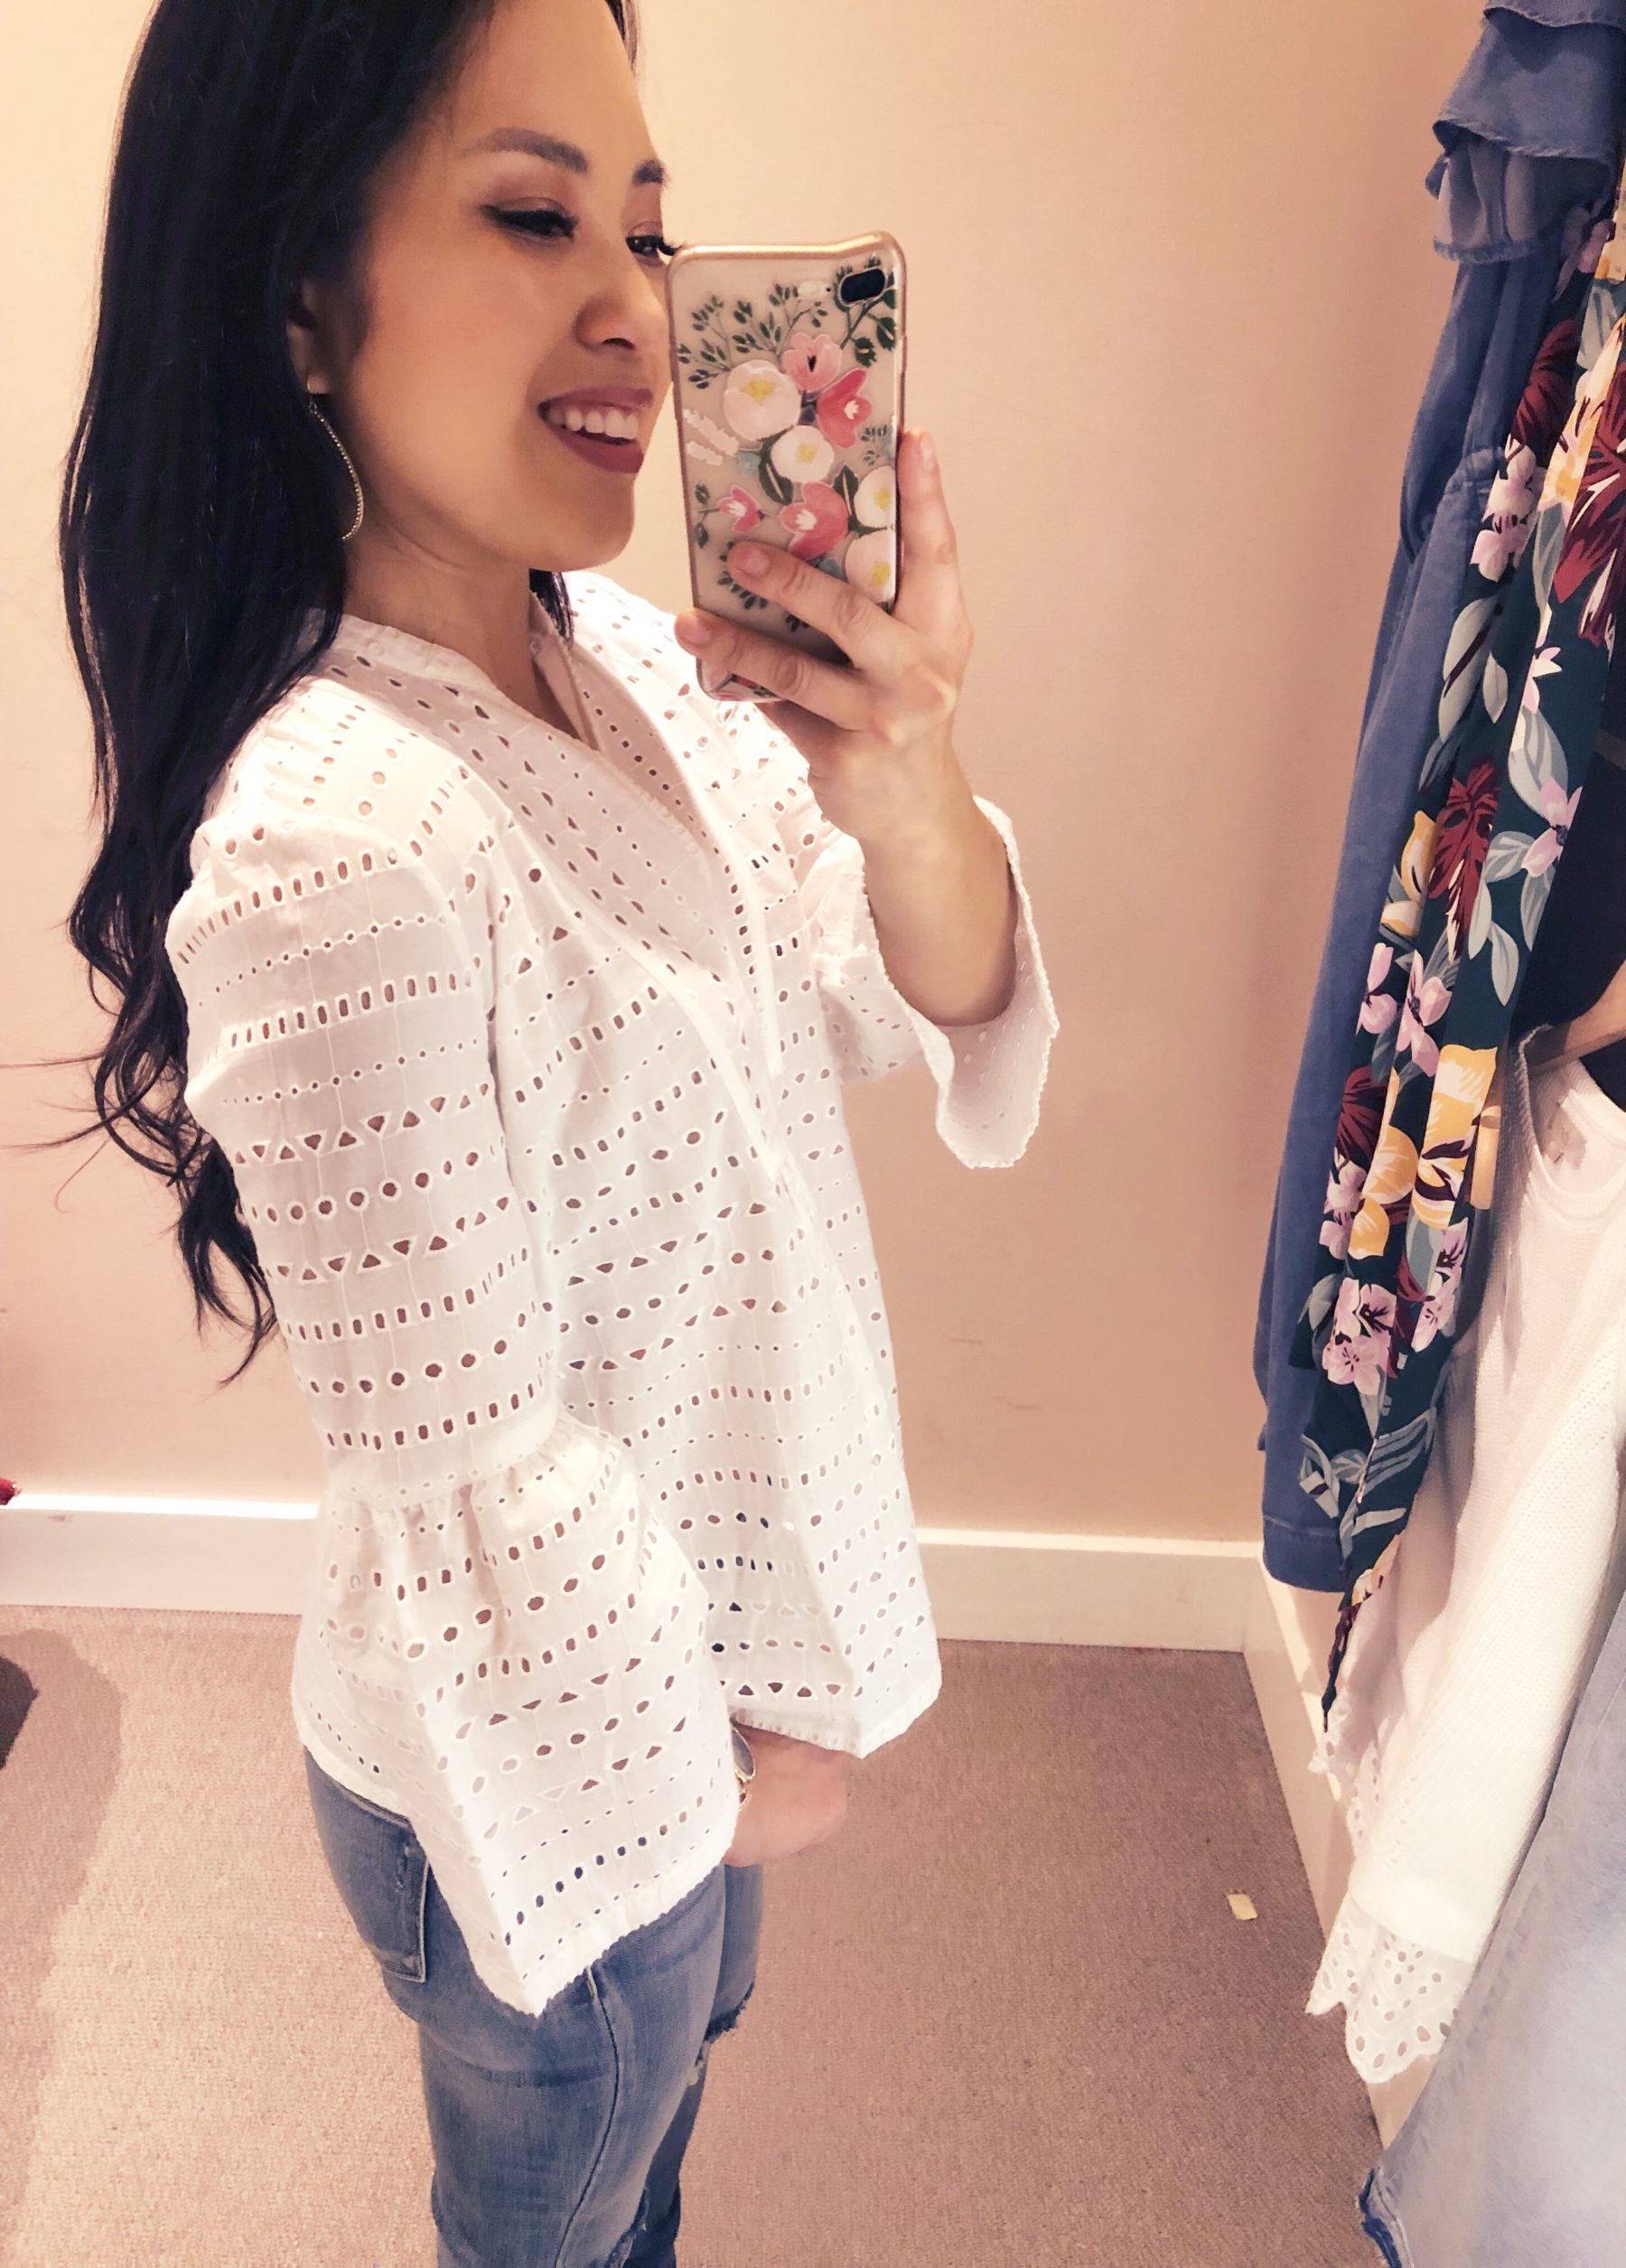 cute & little | dallas petite fashion blog | loft dressing room try on review | eyelet split neck swing top, blanknyc ripped knee jeans | spring outfit - LOFT Dressing Room Try-On by popular Dallas petite fashion blogger, cute & little